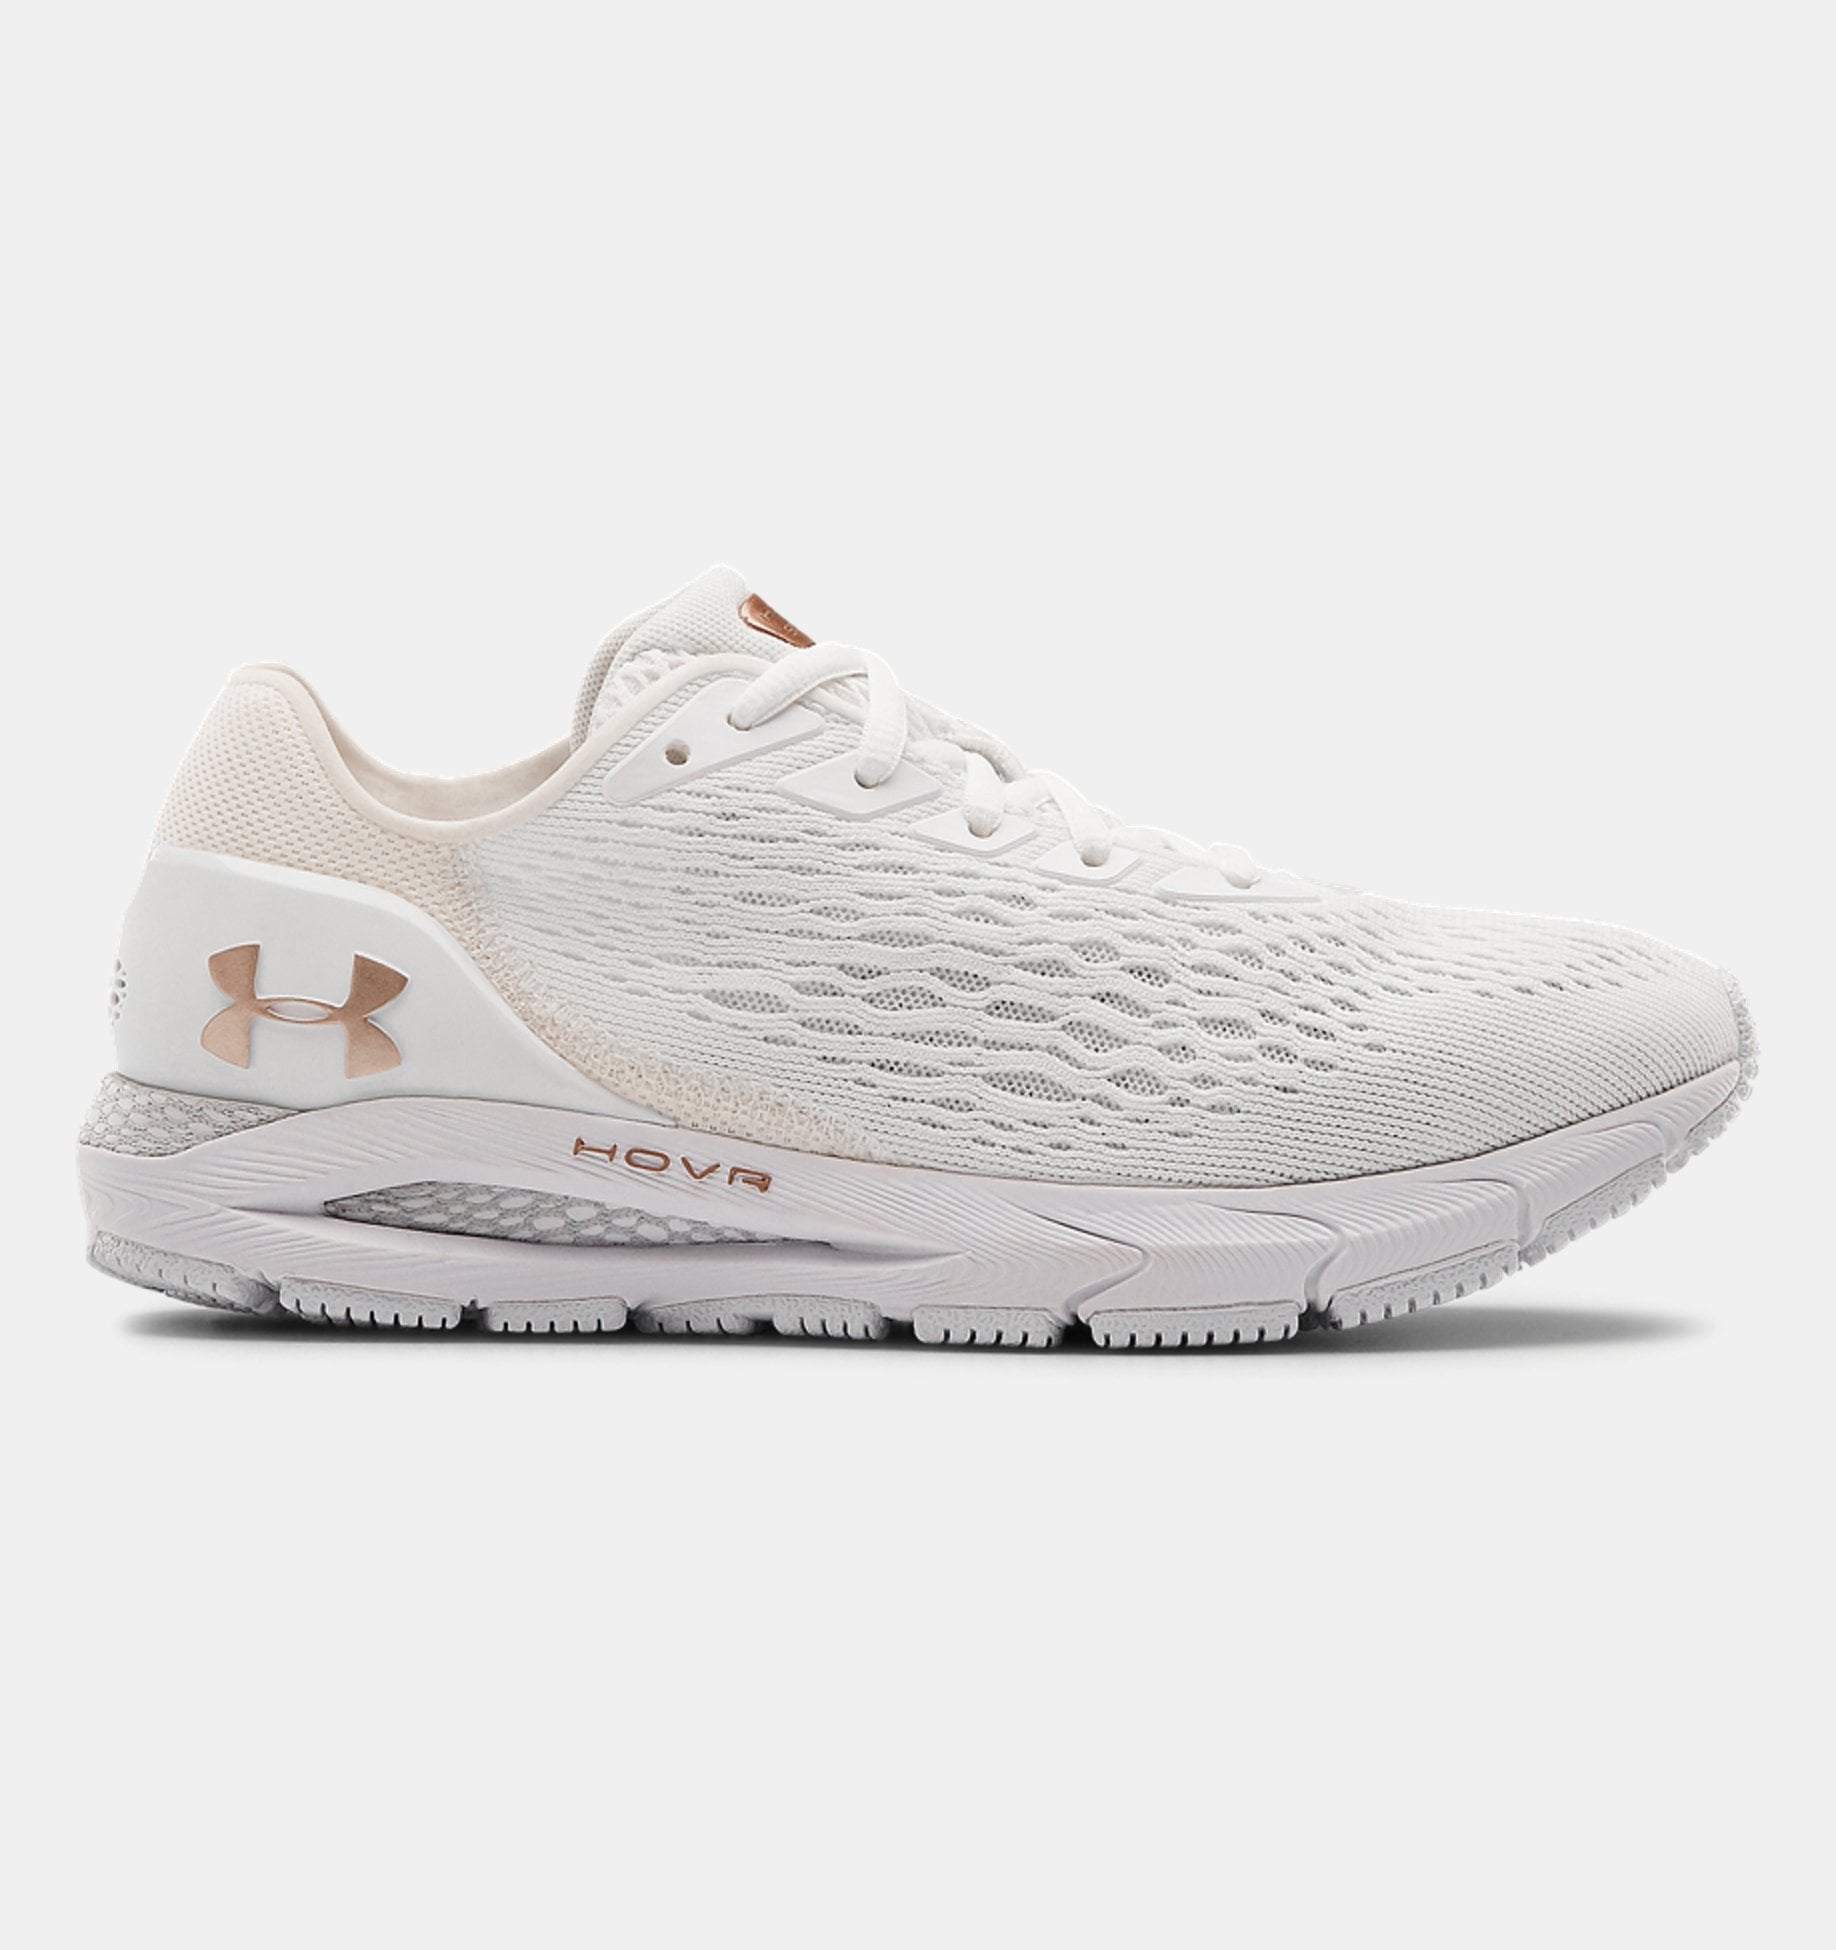 Under Armour Walking Shoes That Add 